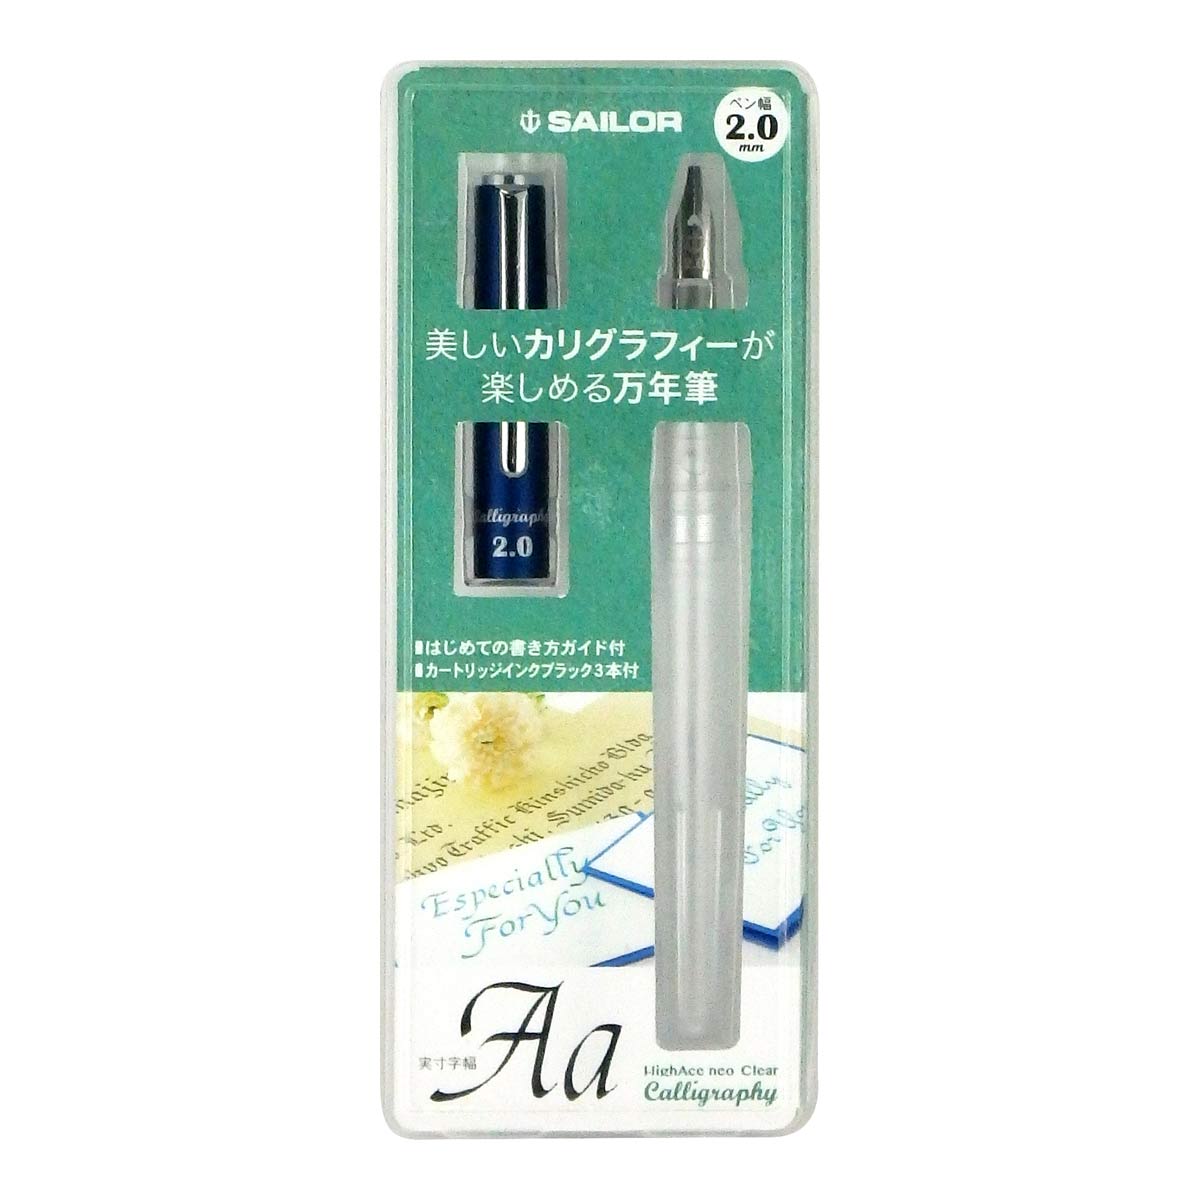 Sailor - High Ace Neo 2,0 mm